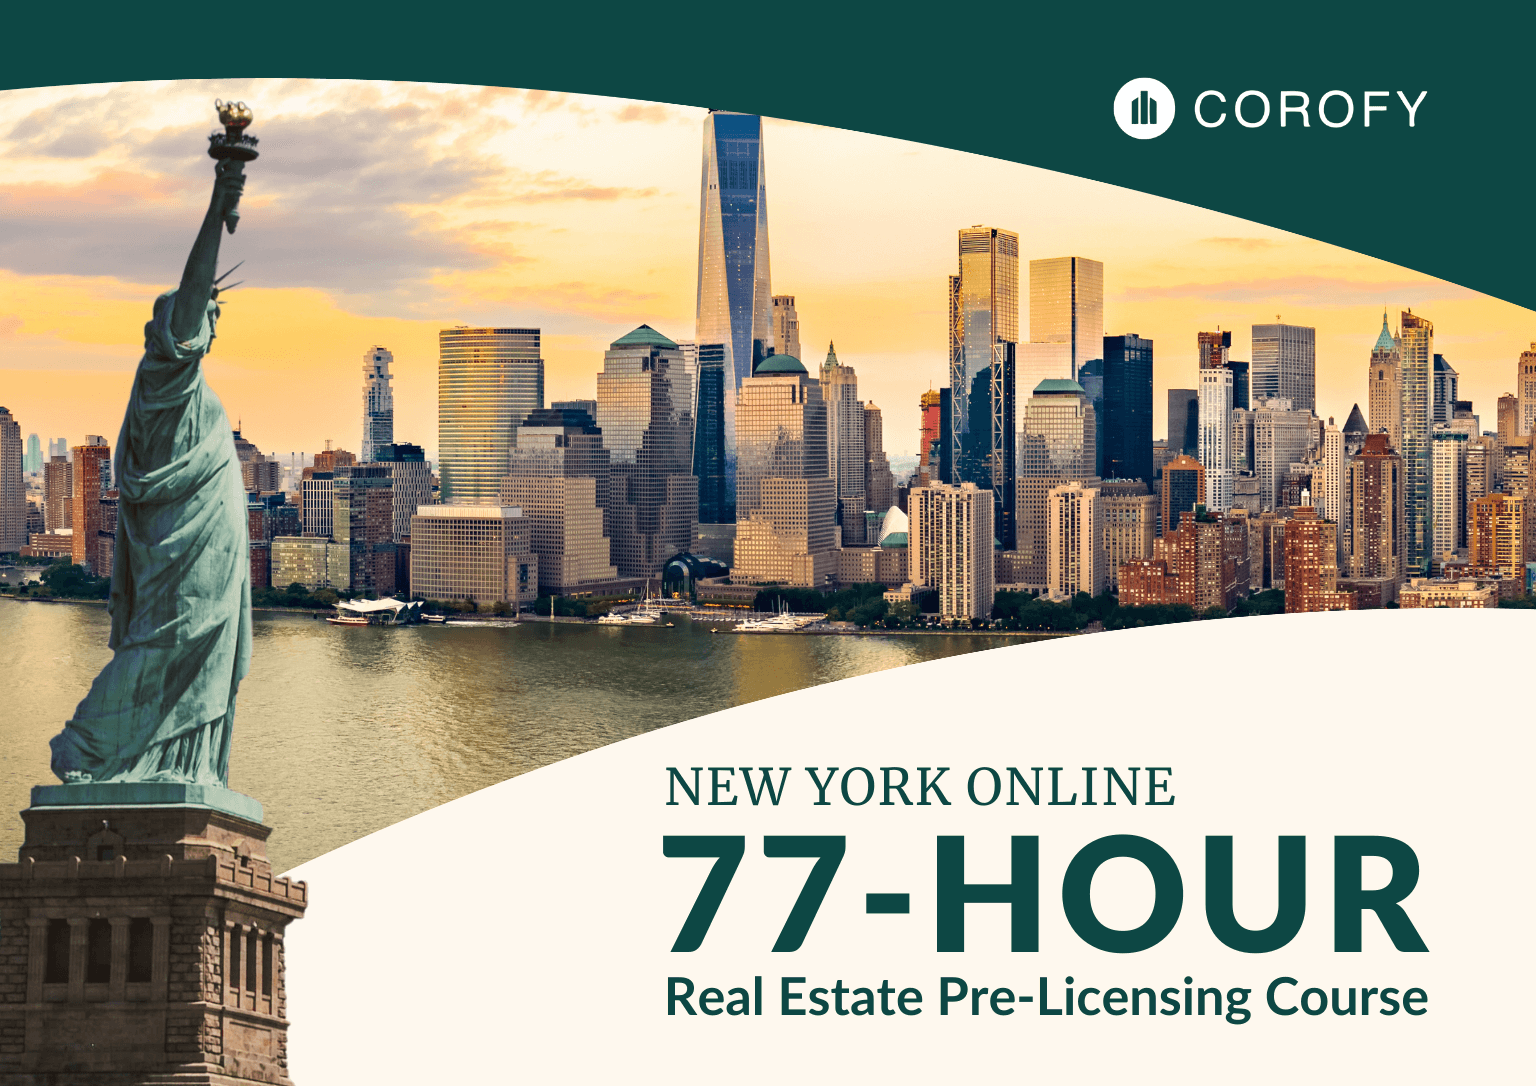 New-York-Online-77-hour-Real-Estate-Pre-Licensing-Course-1.png